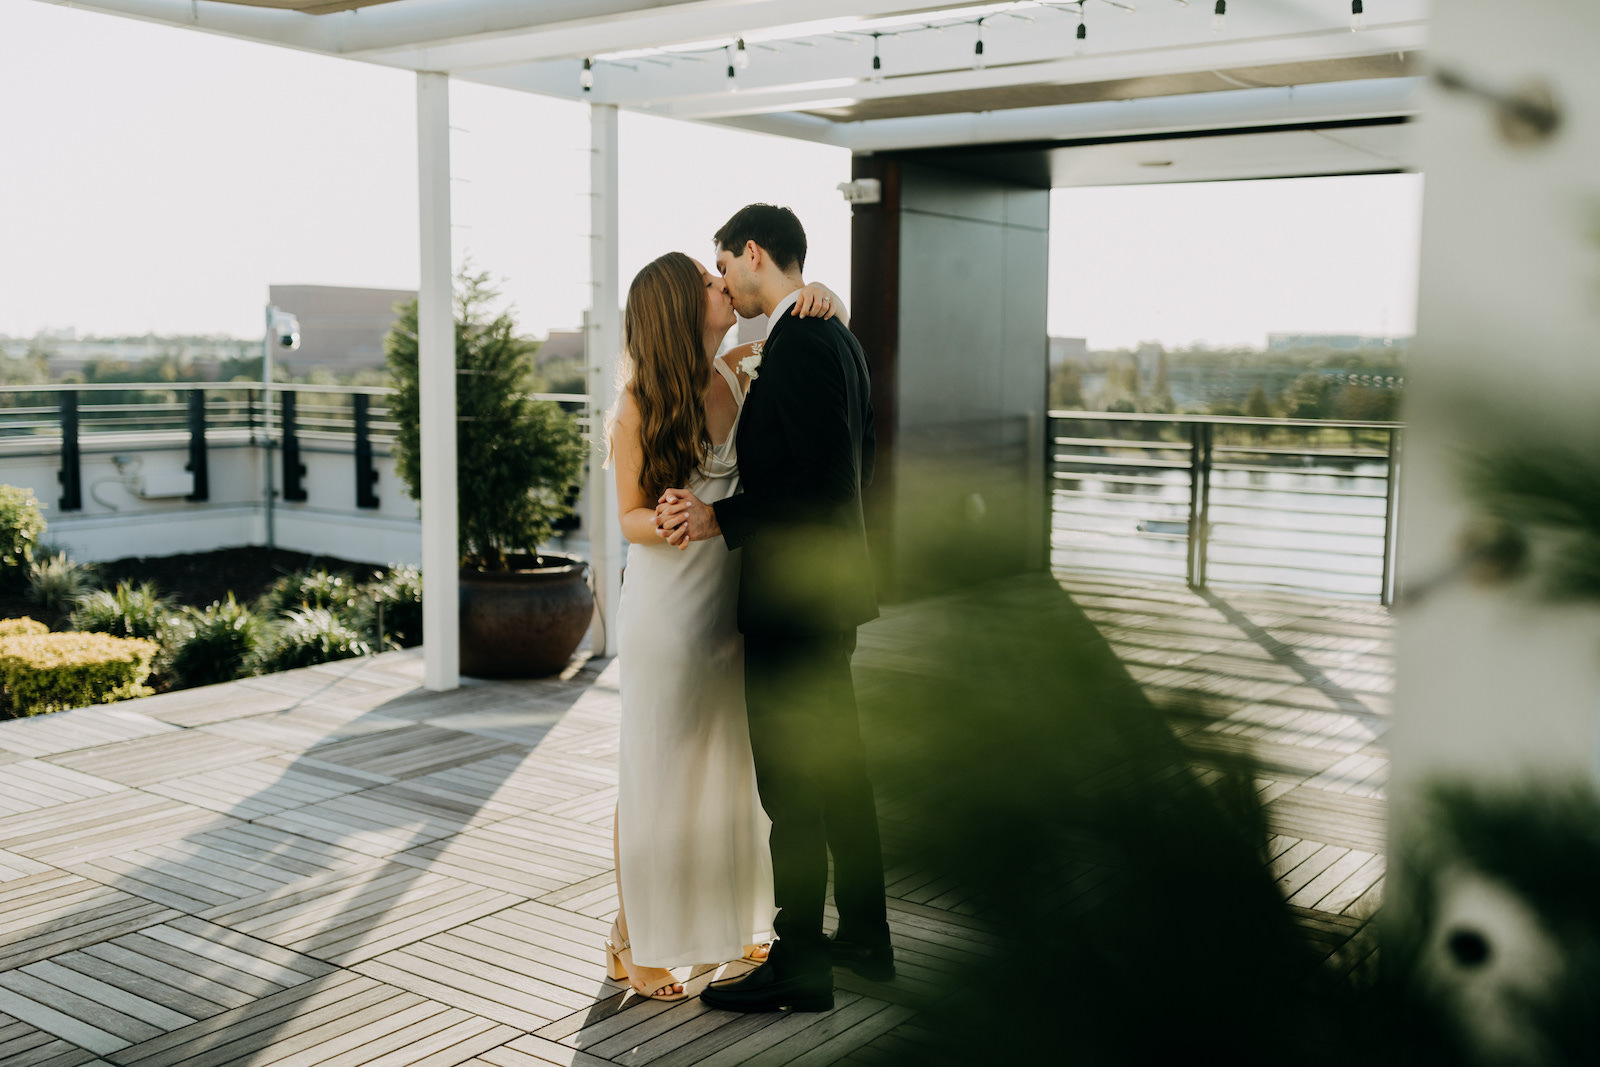 Modern Industrial Bride and Groom First Dance on Rooftop | Tampa Bay Wedding Photographer Amber McWhorter | Wedding Planner Elope Tampa Bay | Wedding Venue Rooftop 220